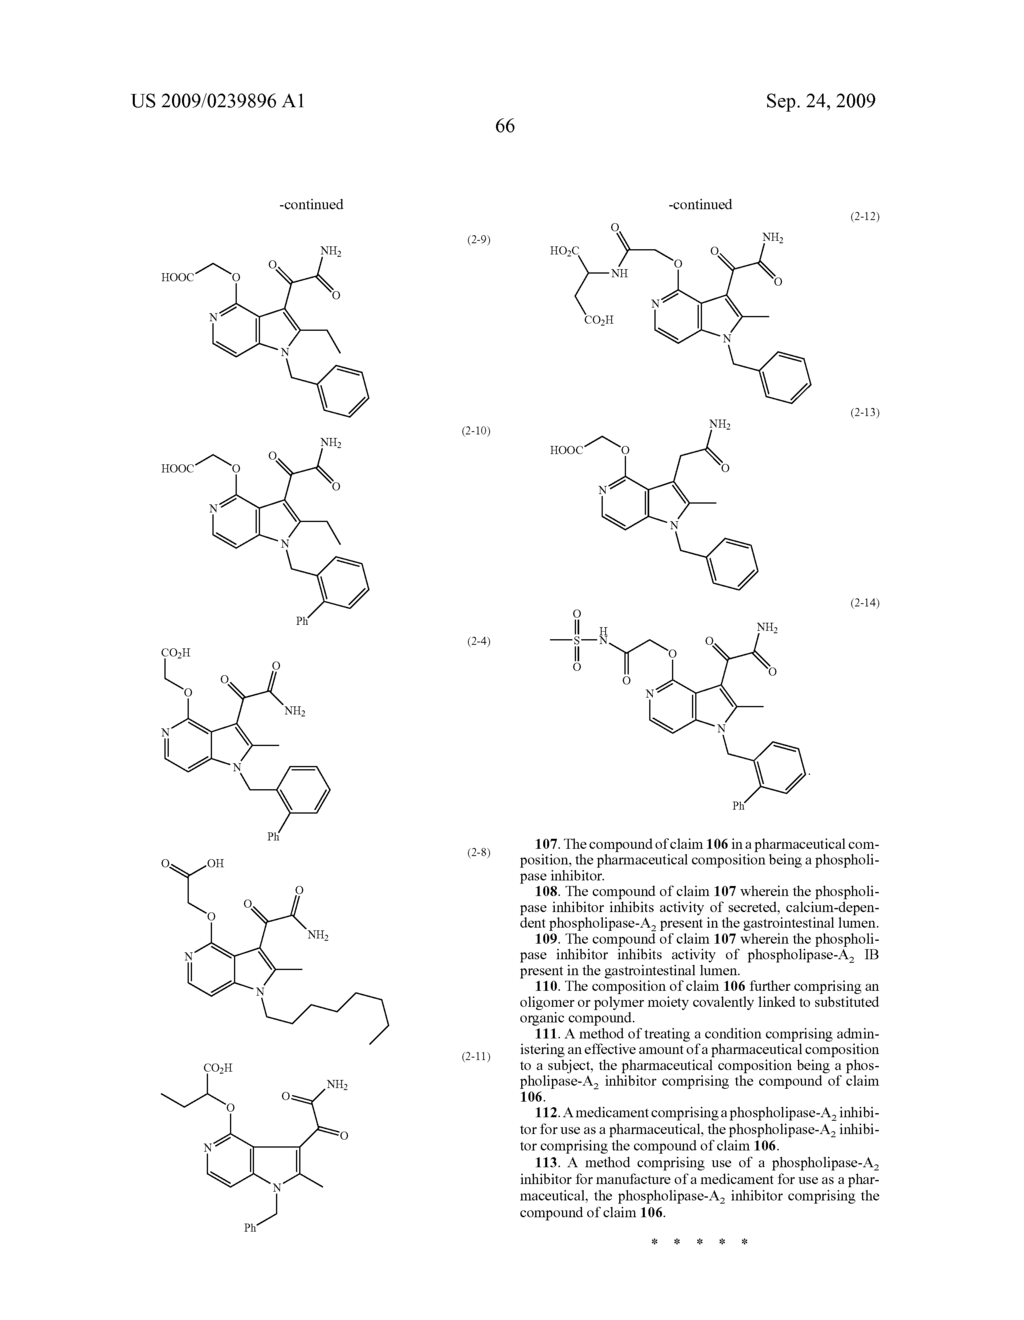 AZAINDOLE COMPOUNDS AND USE THEREOF AS PHOSPHOLIPASE-A2 INHIBITORS - diagram, schematic, and image 76